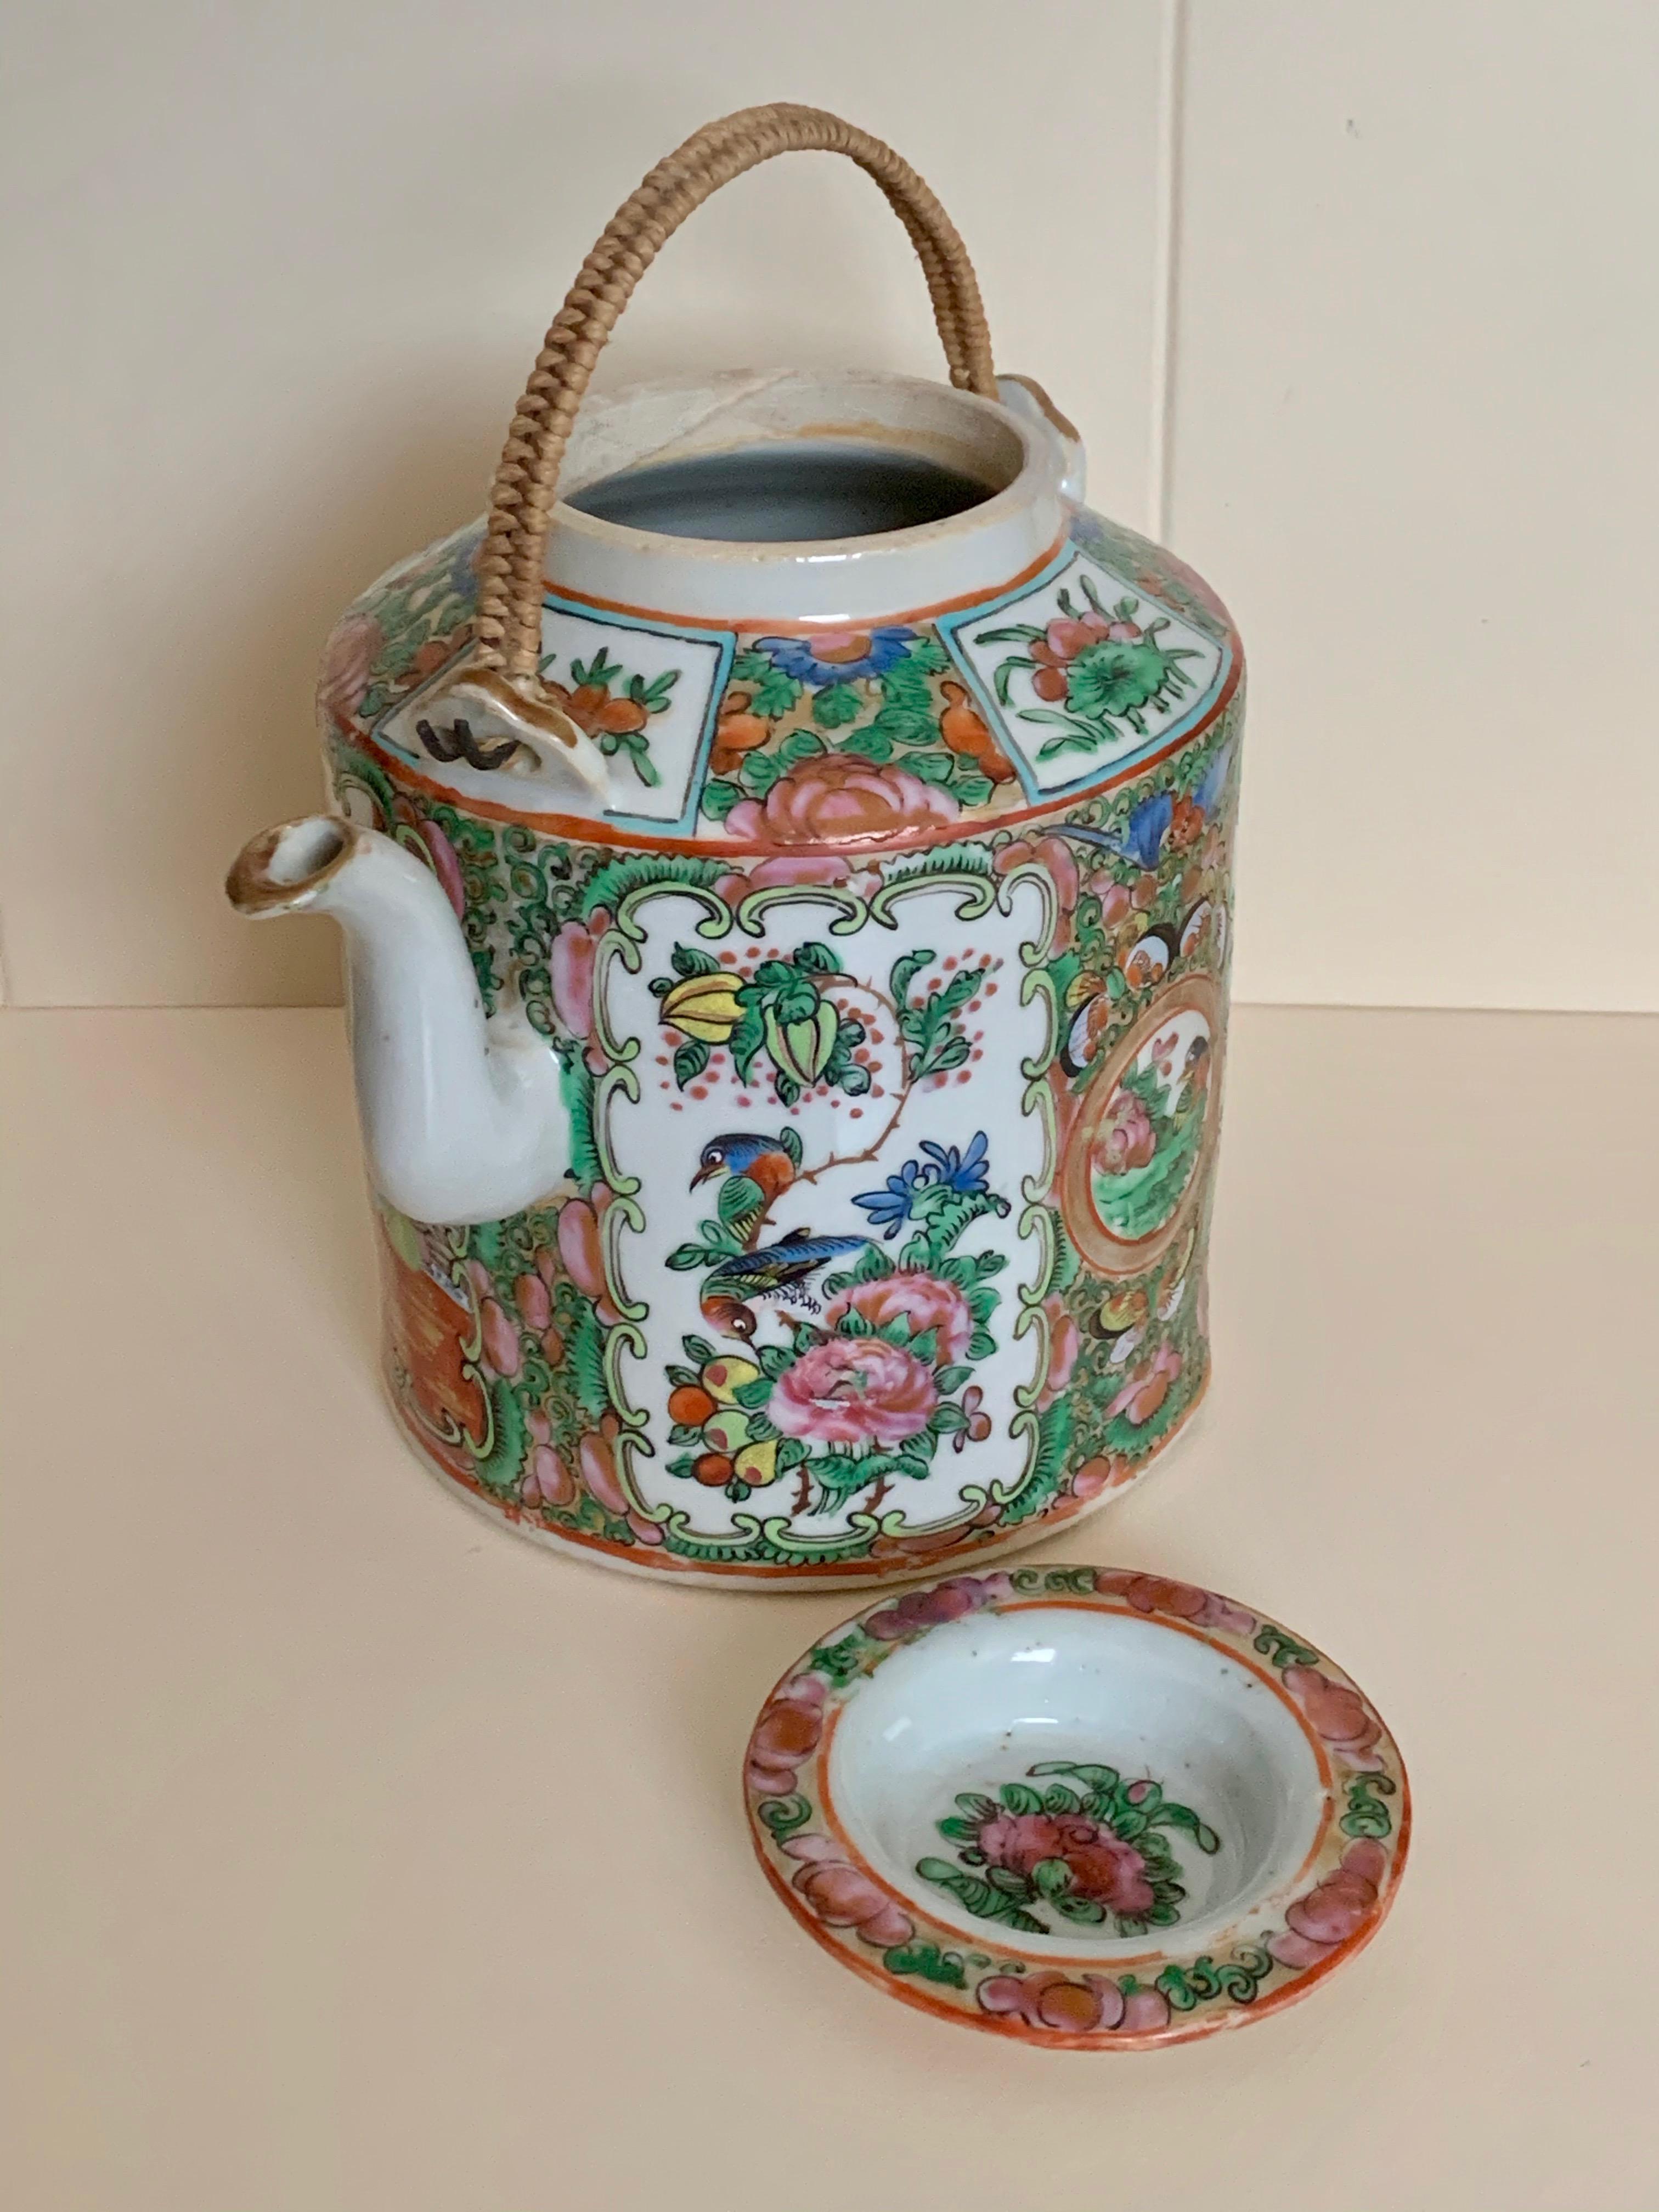 19th century enamelled porcelain canton Chinese export rose medallion porcelain teapot.
Original metal handle covered with a braid.
Measures: Height 15.80 cm
Diameter 12.50cm.
           